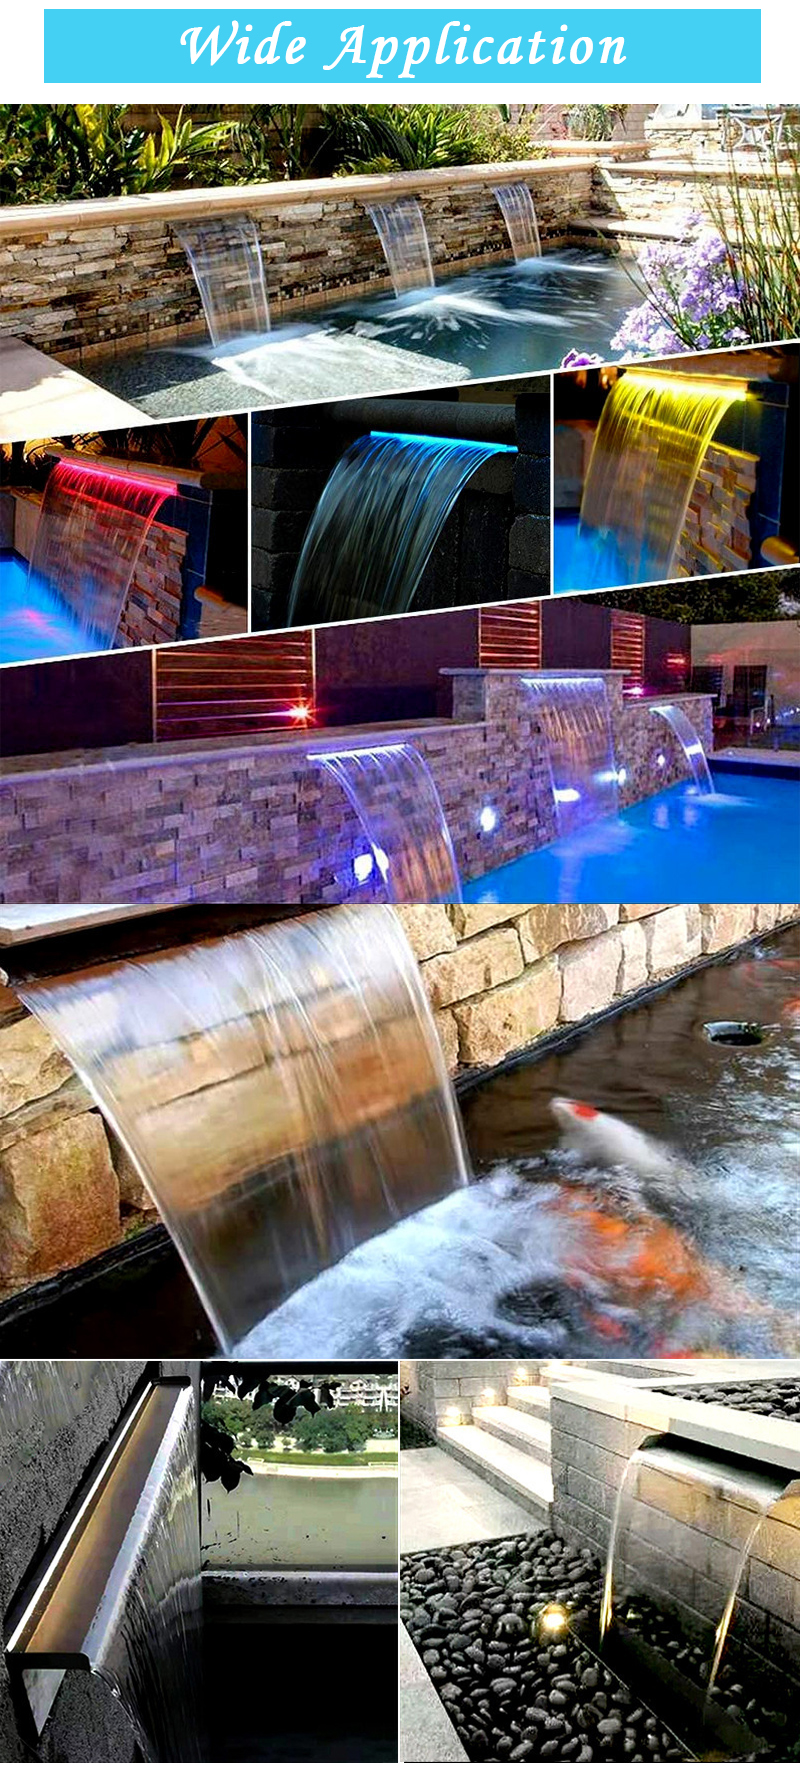 OEM&ODM factory custom size quality Cascada piscina 304 stainless steel SPA swimming pool Waterfall